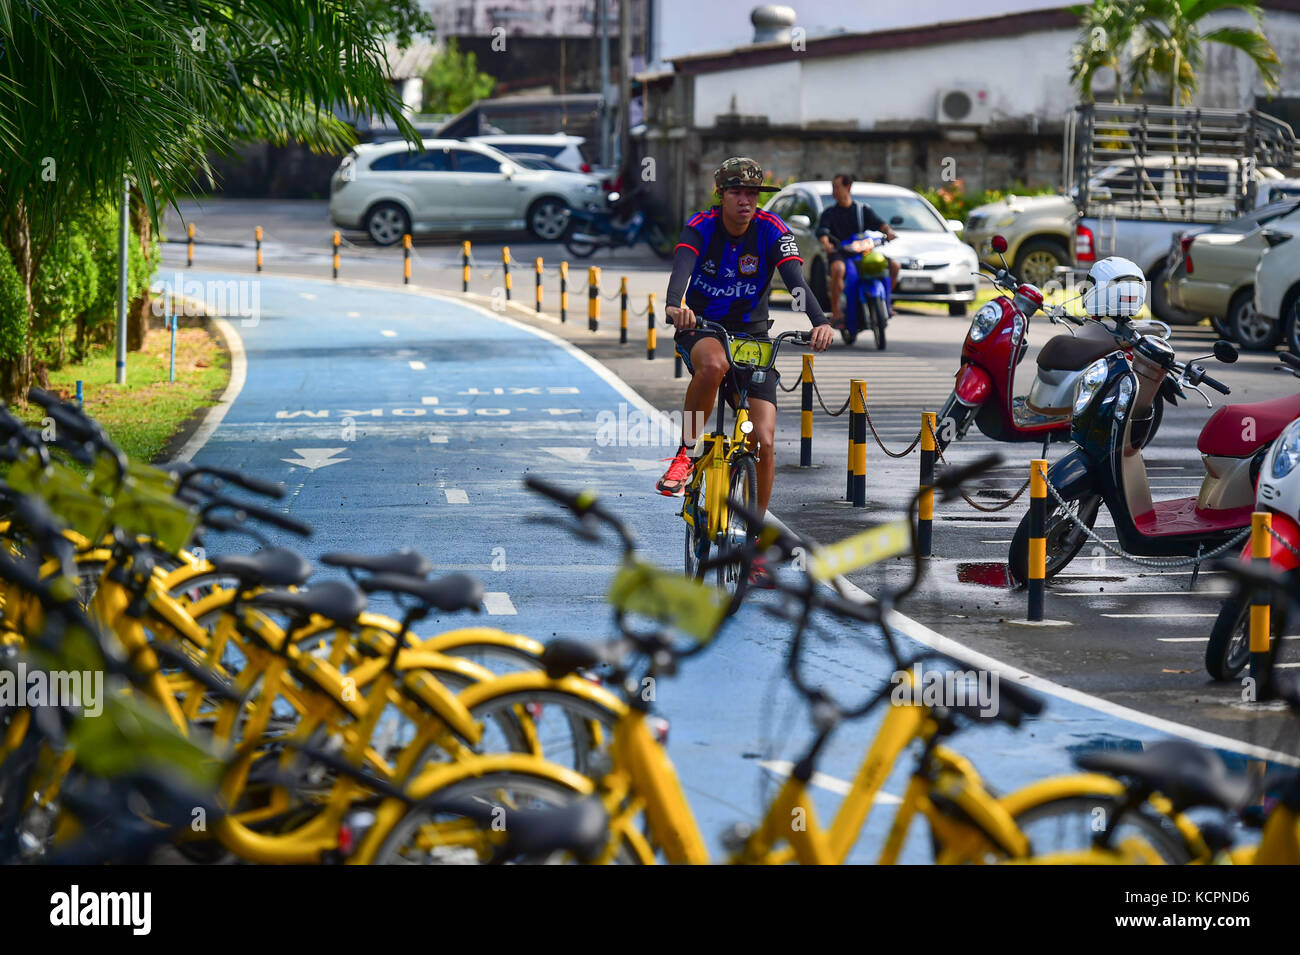 Phuket, Thailand. 6th Oct, 2017. A man rides an ofo sharing-bike on a bike lane at a public park in Phuket, Thailand, Oct. 6, 2017. China's dock-less bike-sharing company ofo provide d more than 1,000 bikes in Phuket's key locations in late September and offered a 1-month free trial without deposit fee. Now the bike-sharing service has benefited local residents and tourists. Ofo's regular service fee will be charged at 5 Baht per 30 minutes usage, with a deposit fee of 99 Baht. Credit: Li Mangmang/Xinhua/Alamy Live News Stock Photo